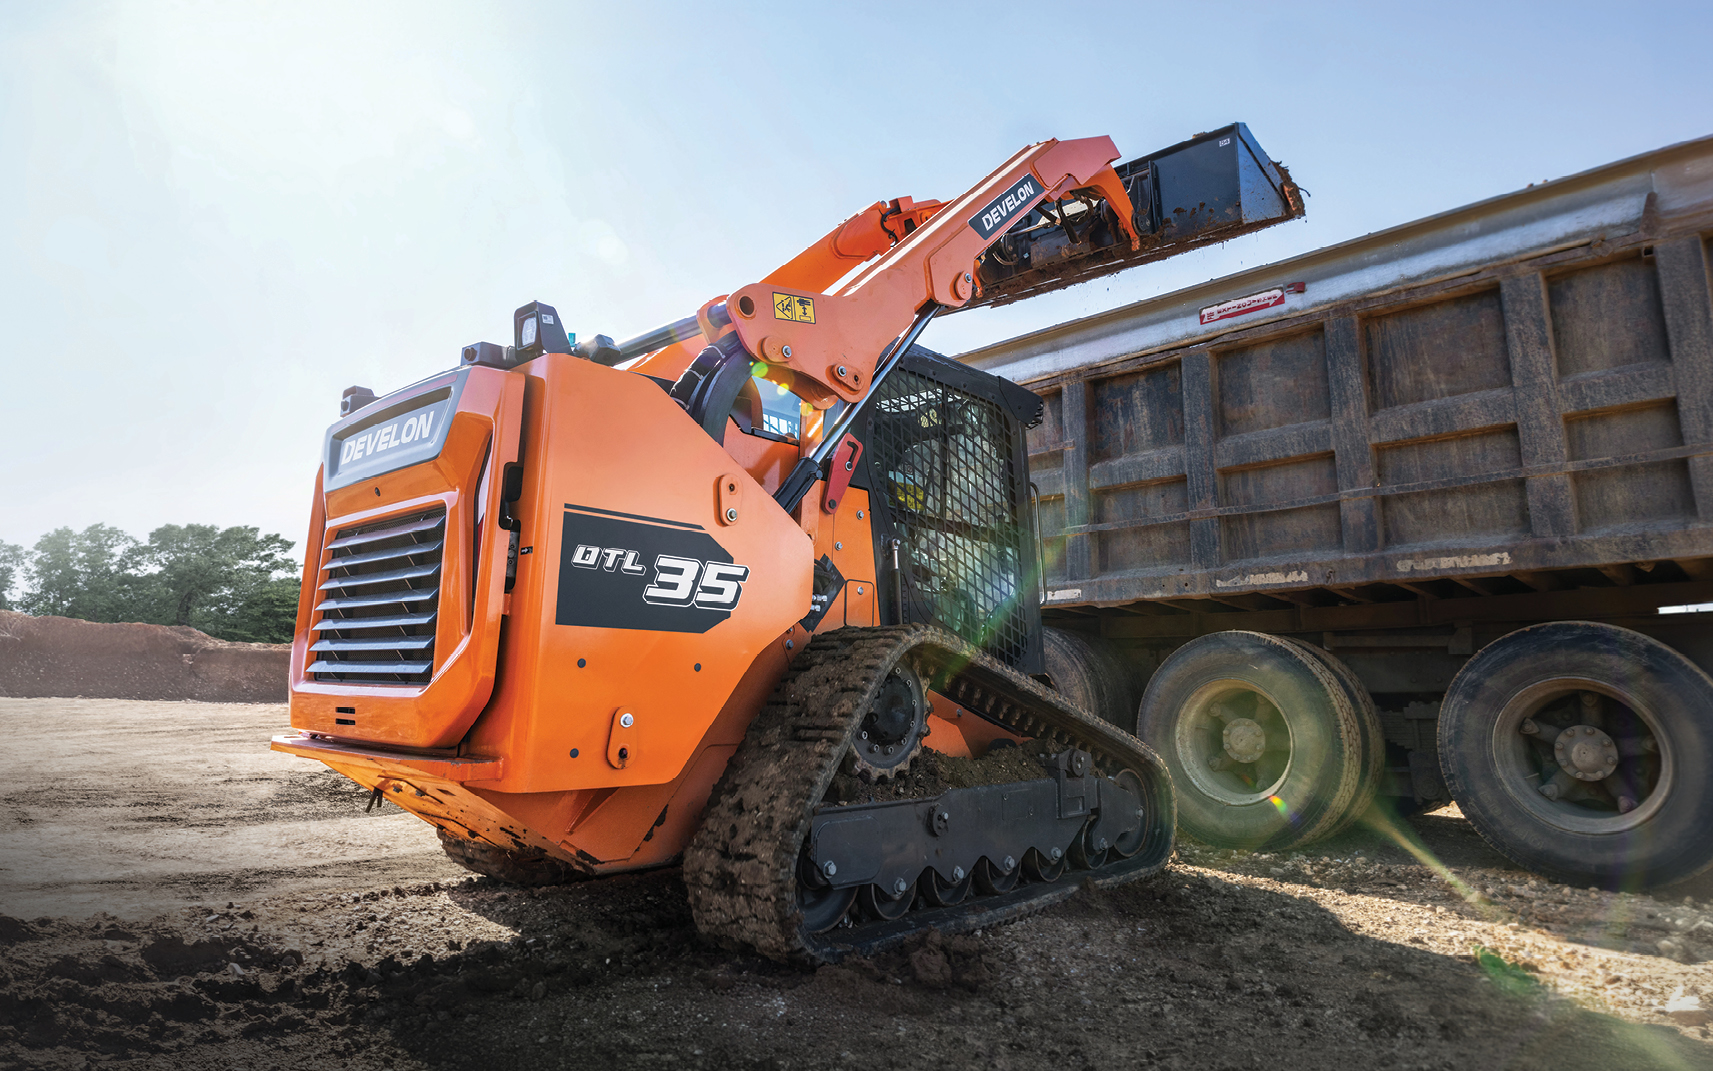 DEVELON DTL35 compact track loader lifting a bucket of dirt into a high-sided dump truck.